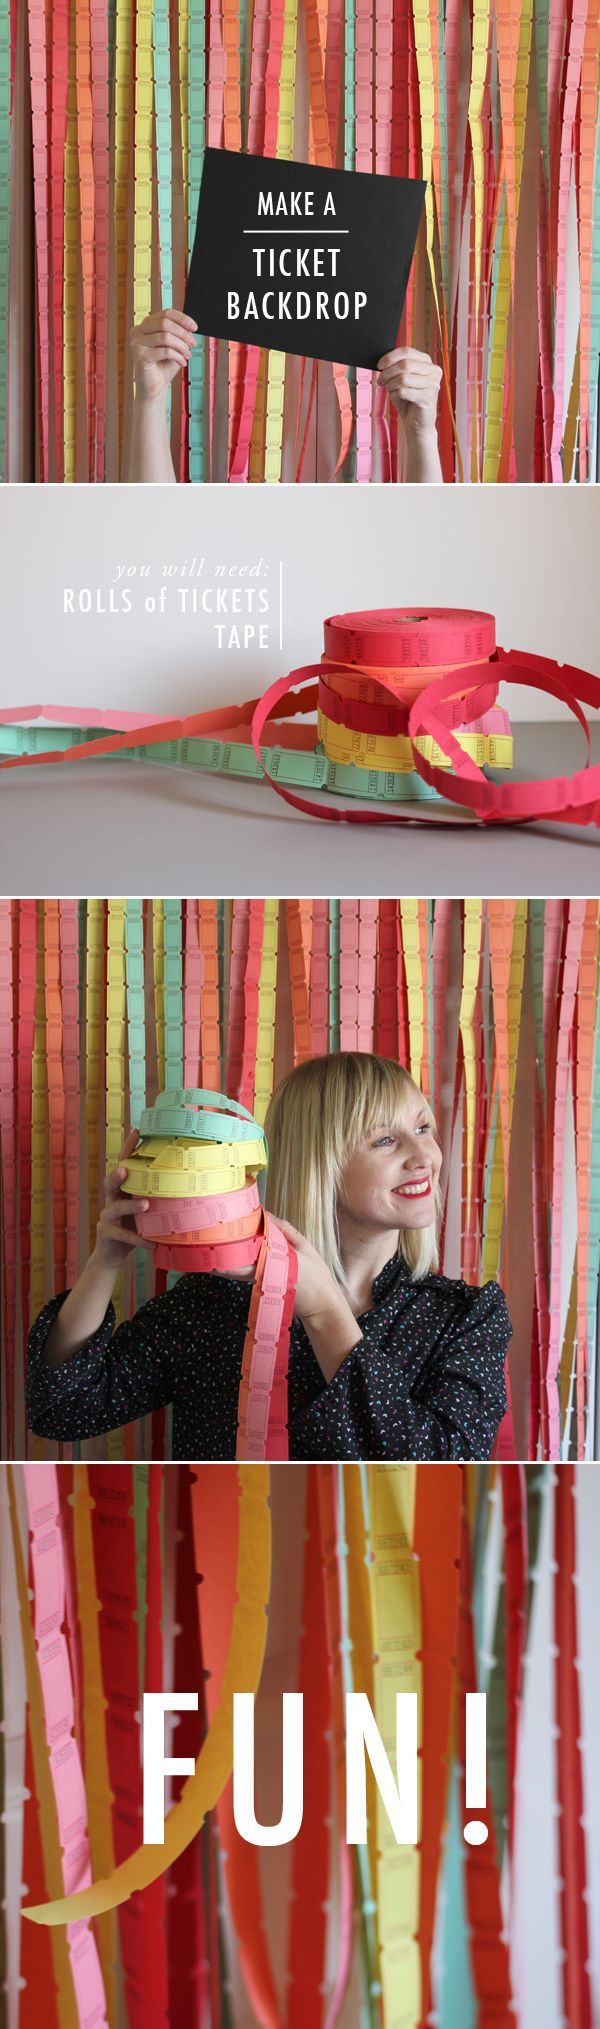 Another good idea that never crossed my mind. How fun is this?! DIY ticket backdrop for a photobooth